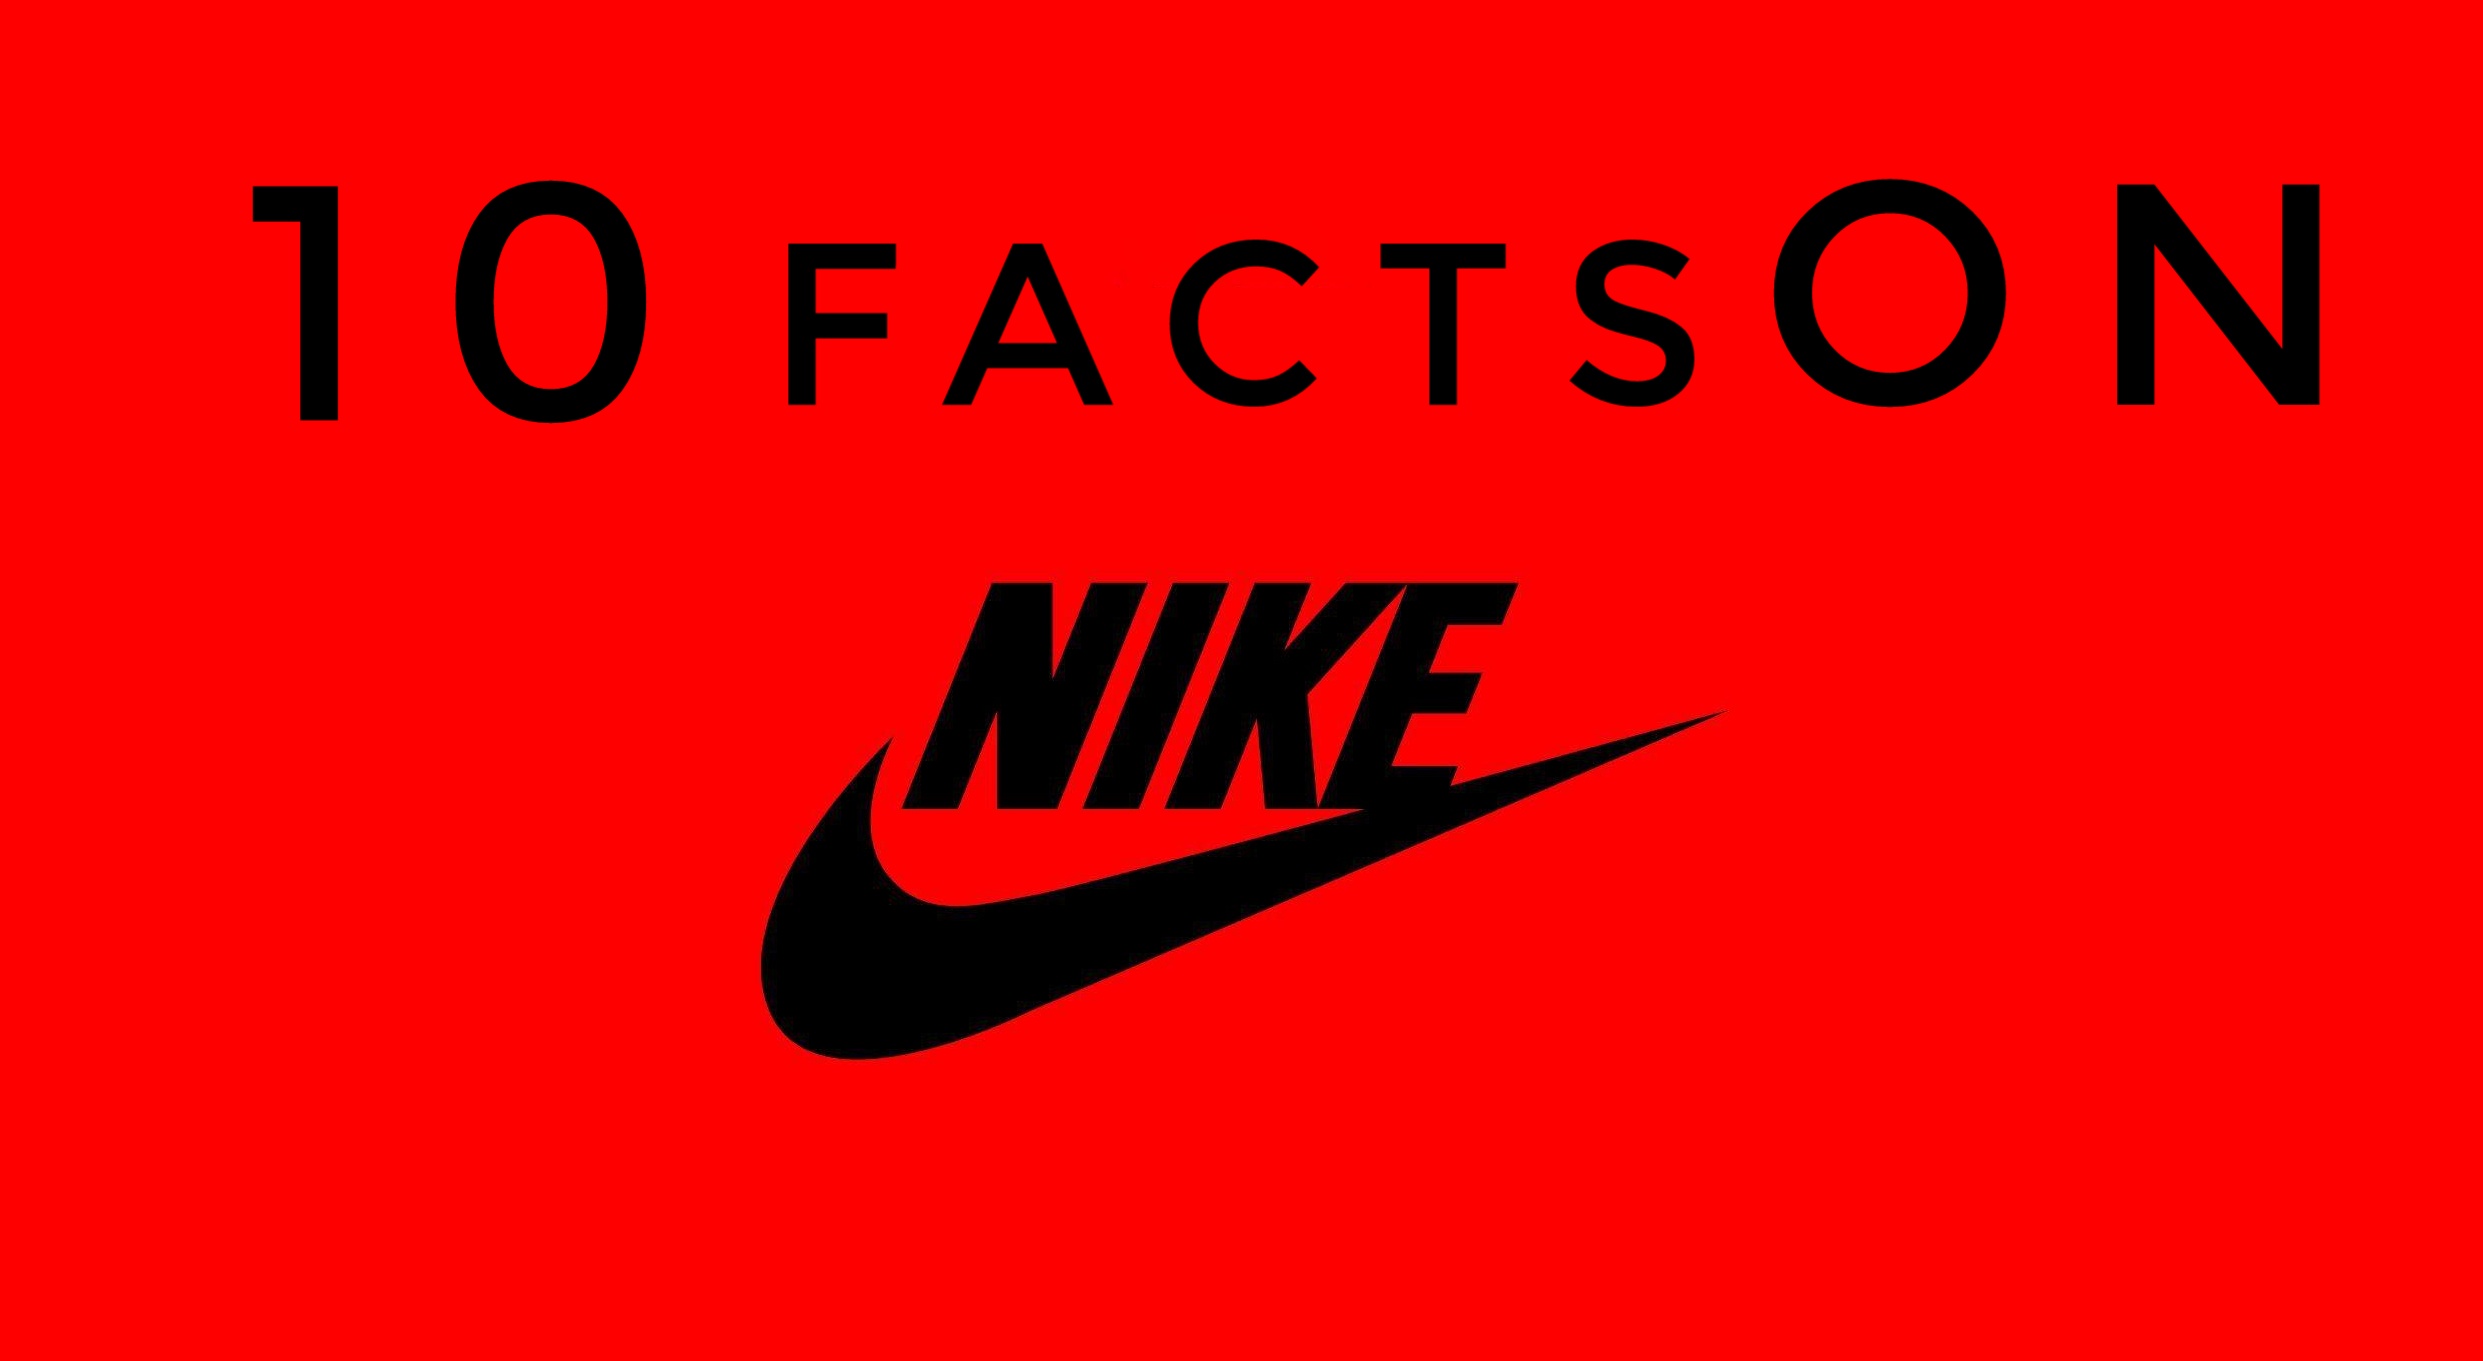 facts about nike